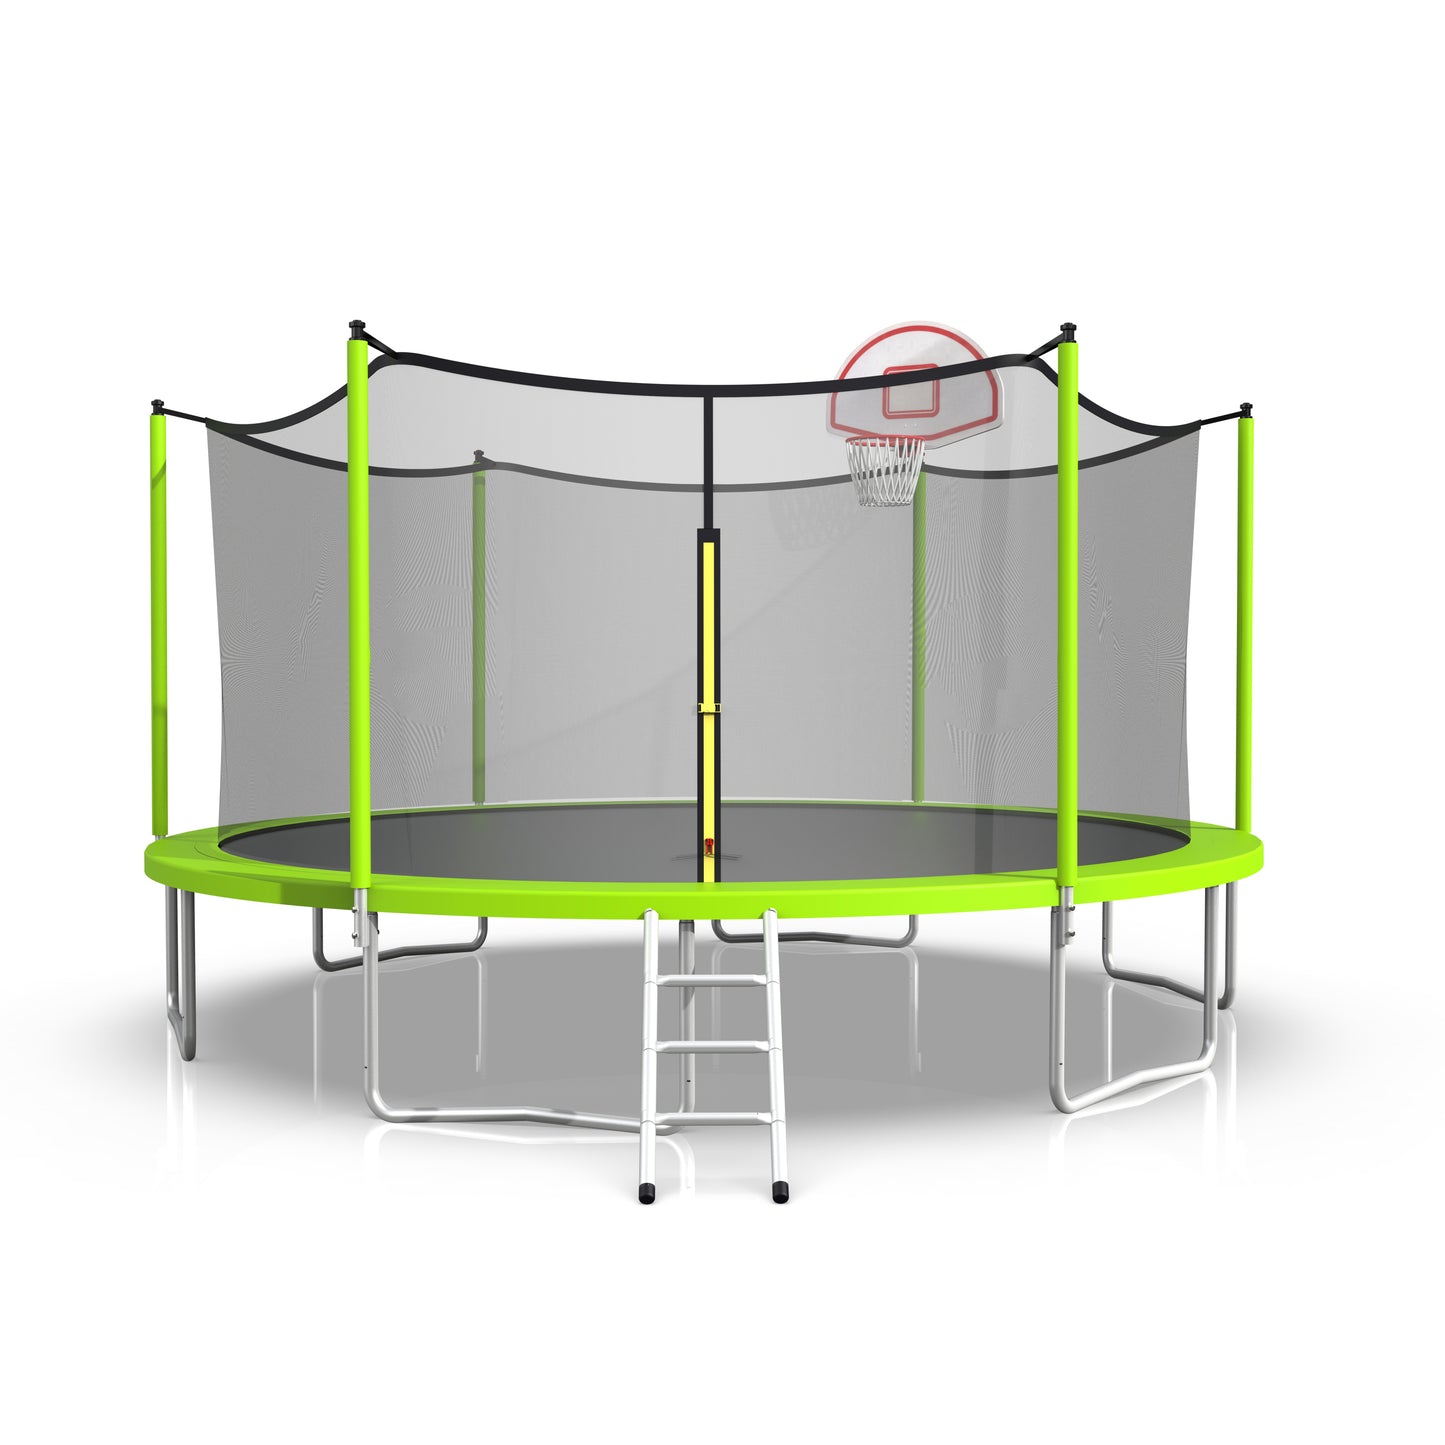 16ft Trampoline with Enclosure, New Upgraded Kids Outdoor Trampoline with Basketball Hoop and Ladder, Heavy-Duty Round Trampoline，Green